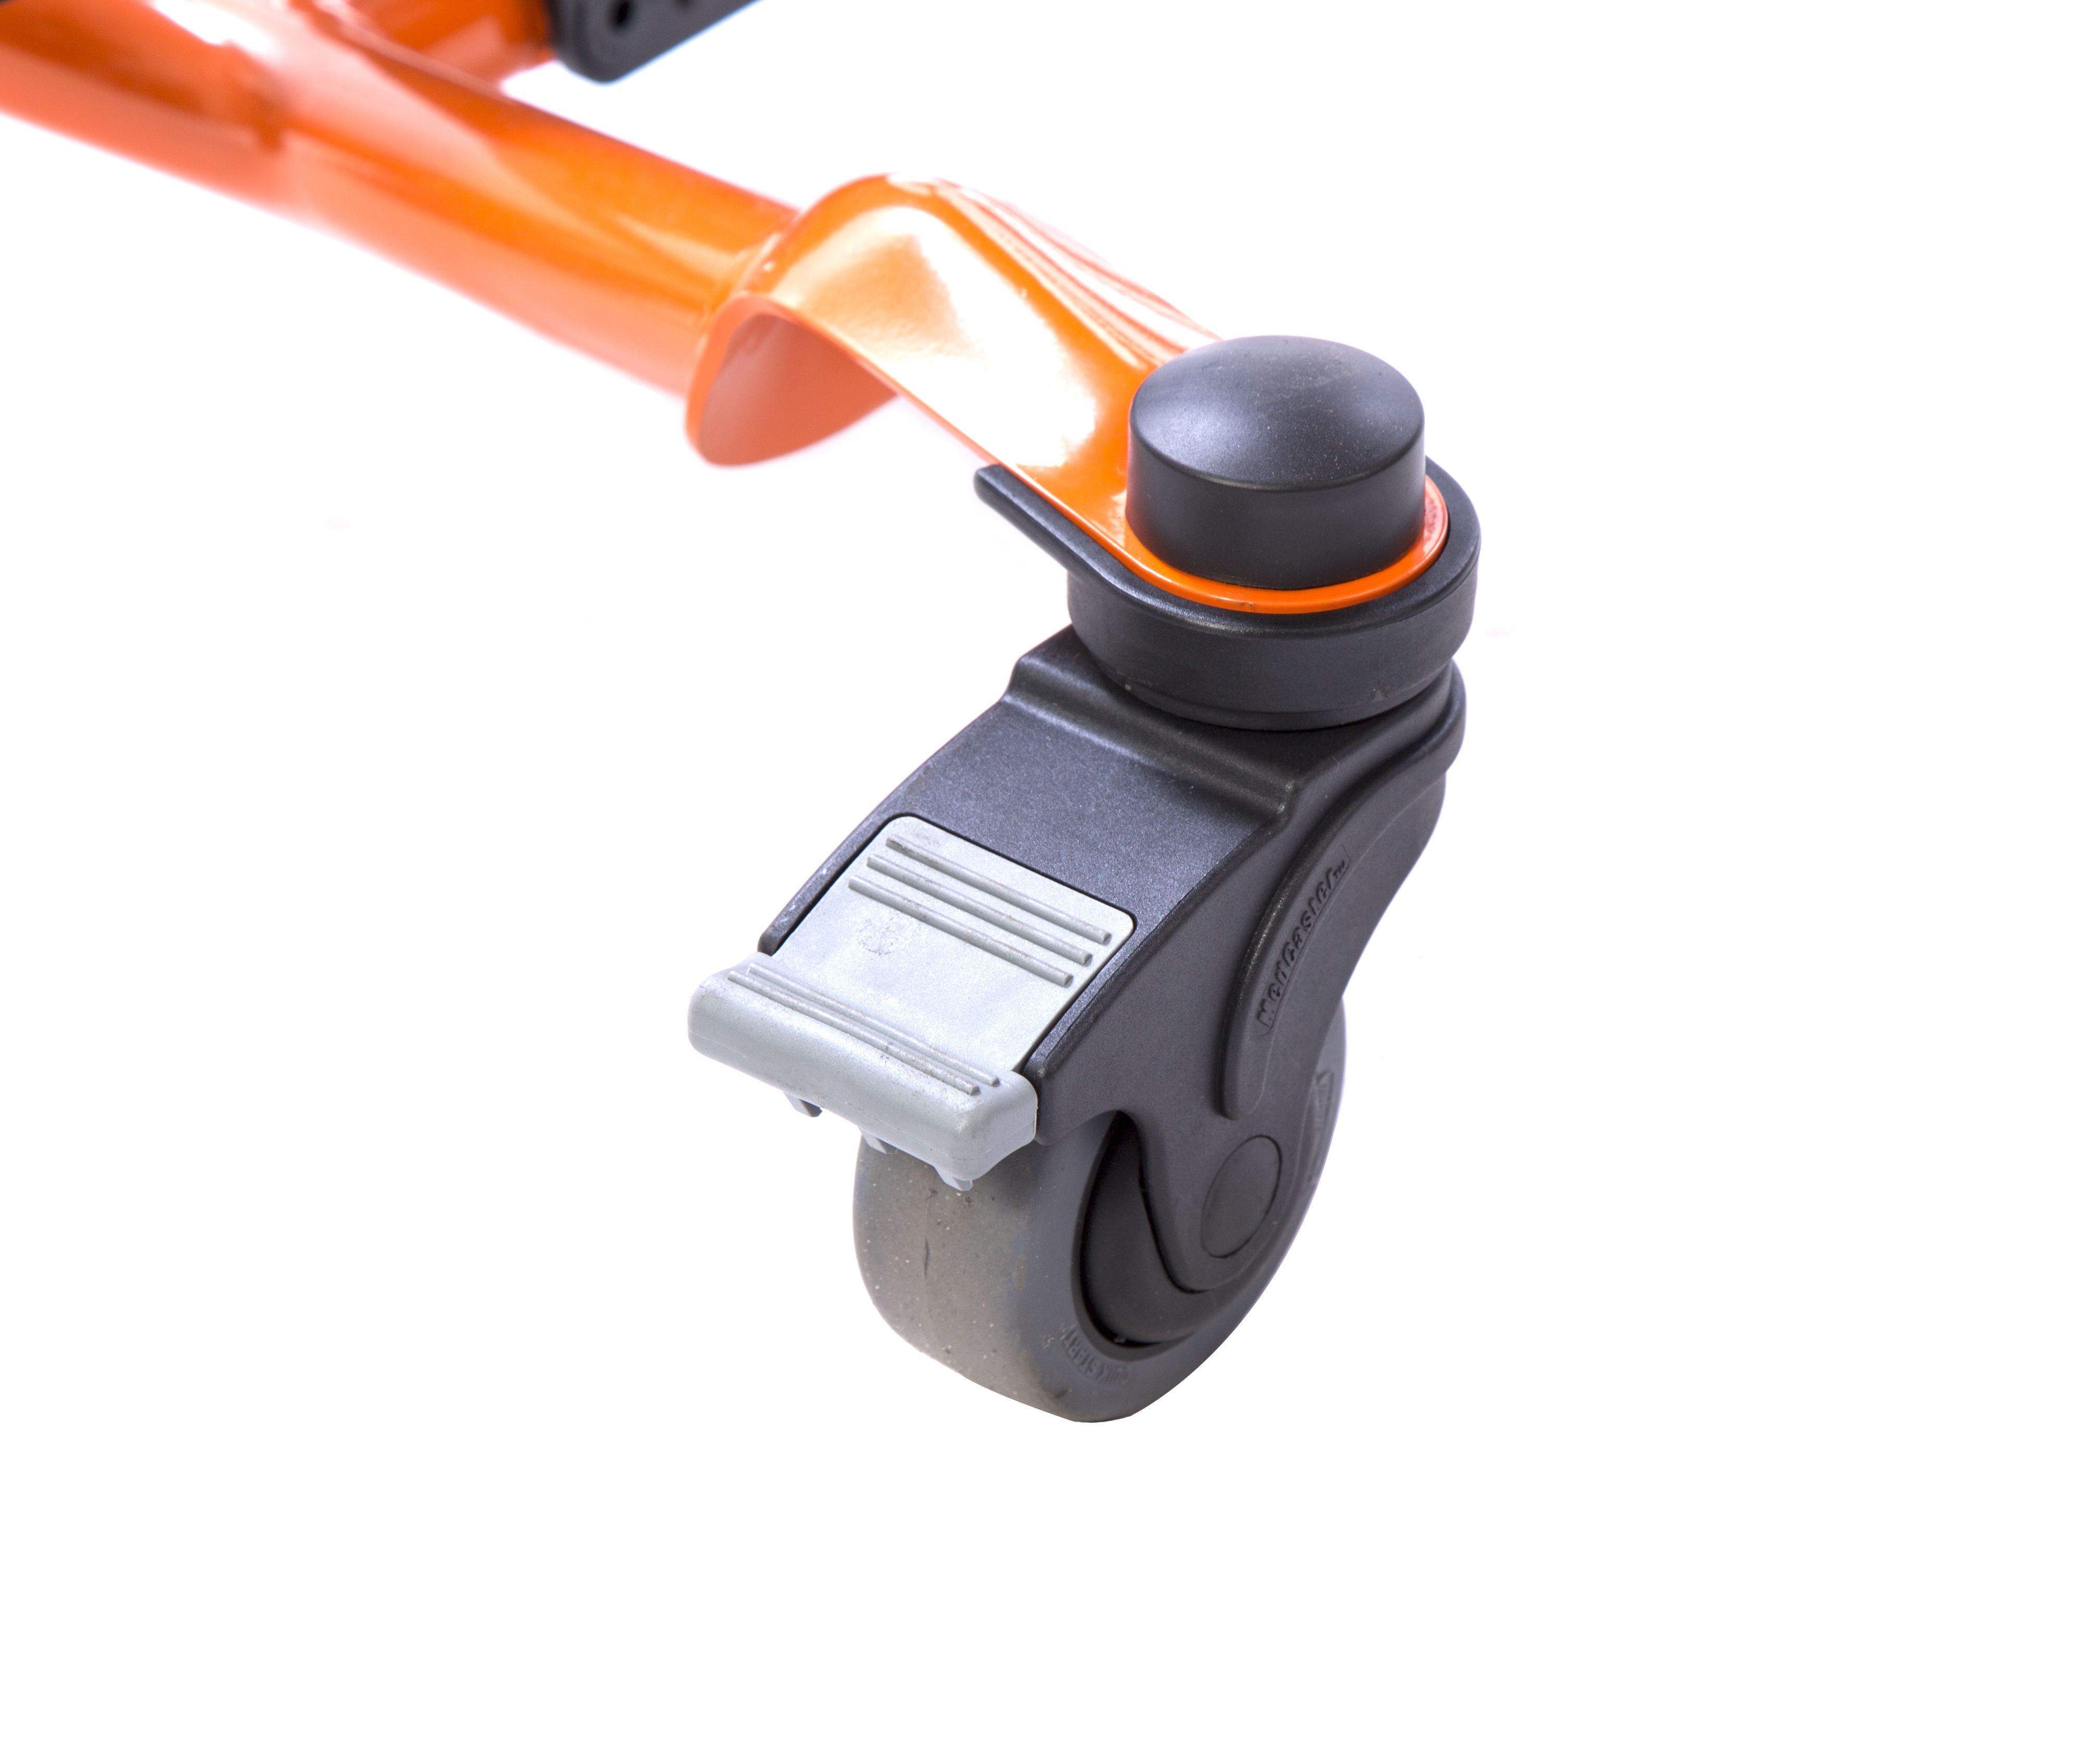 Directional Locking Caster (replaces one swivel caster)